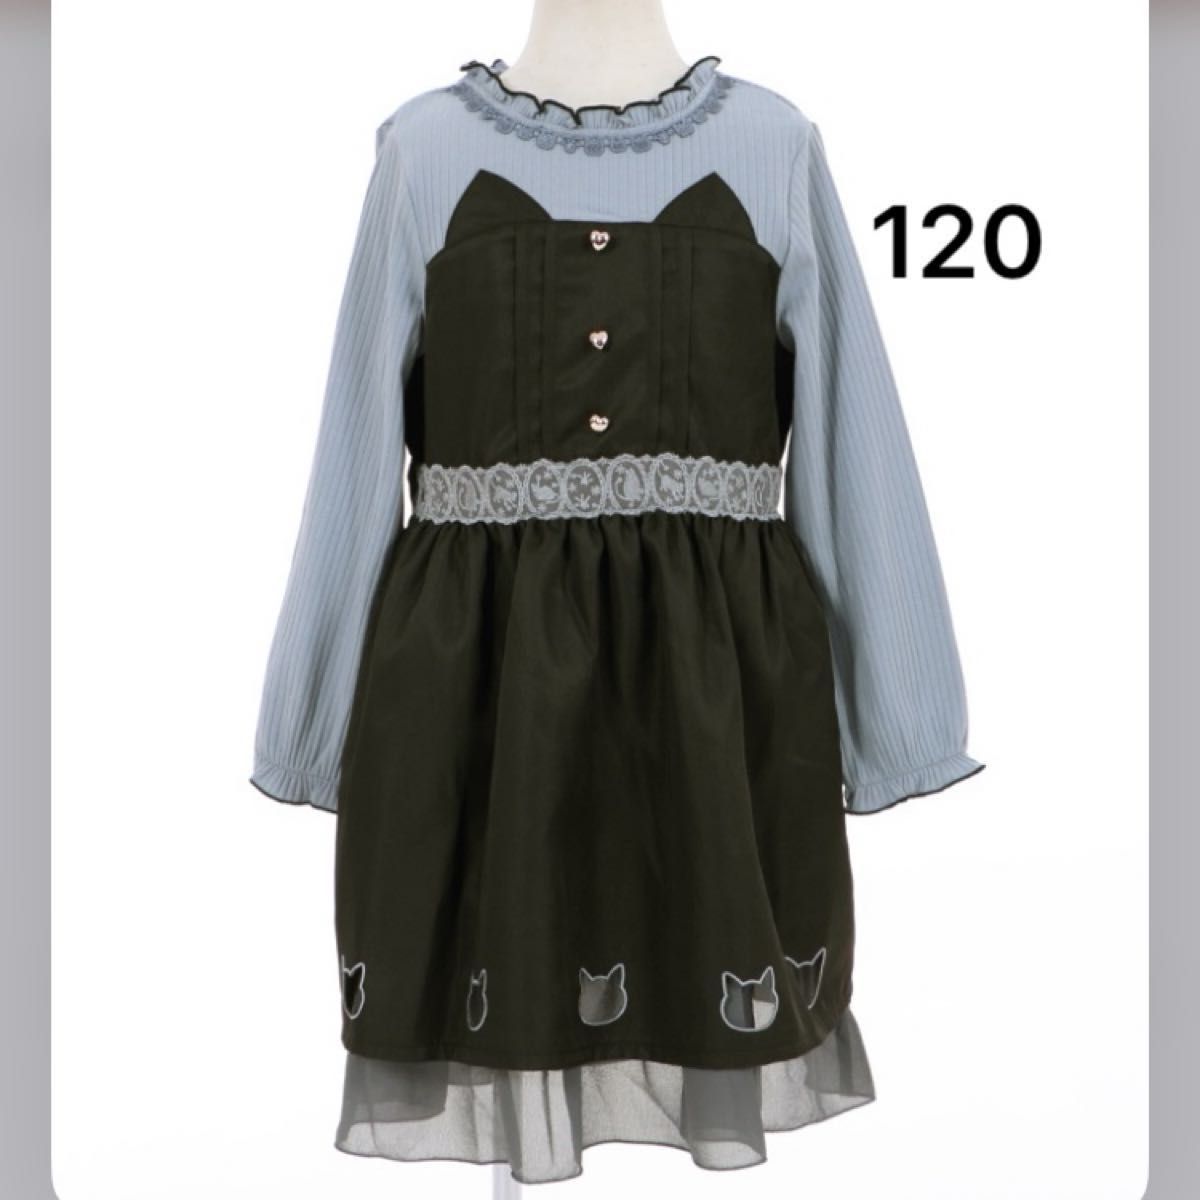 axes femme kids★新品、未使用タグ付き★ネコモチーフドッキングワンピース★120